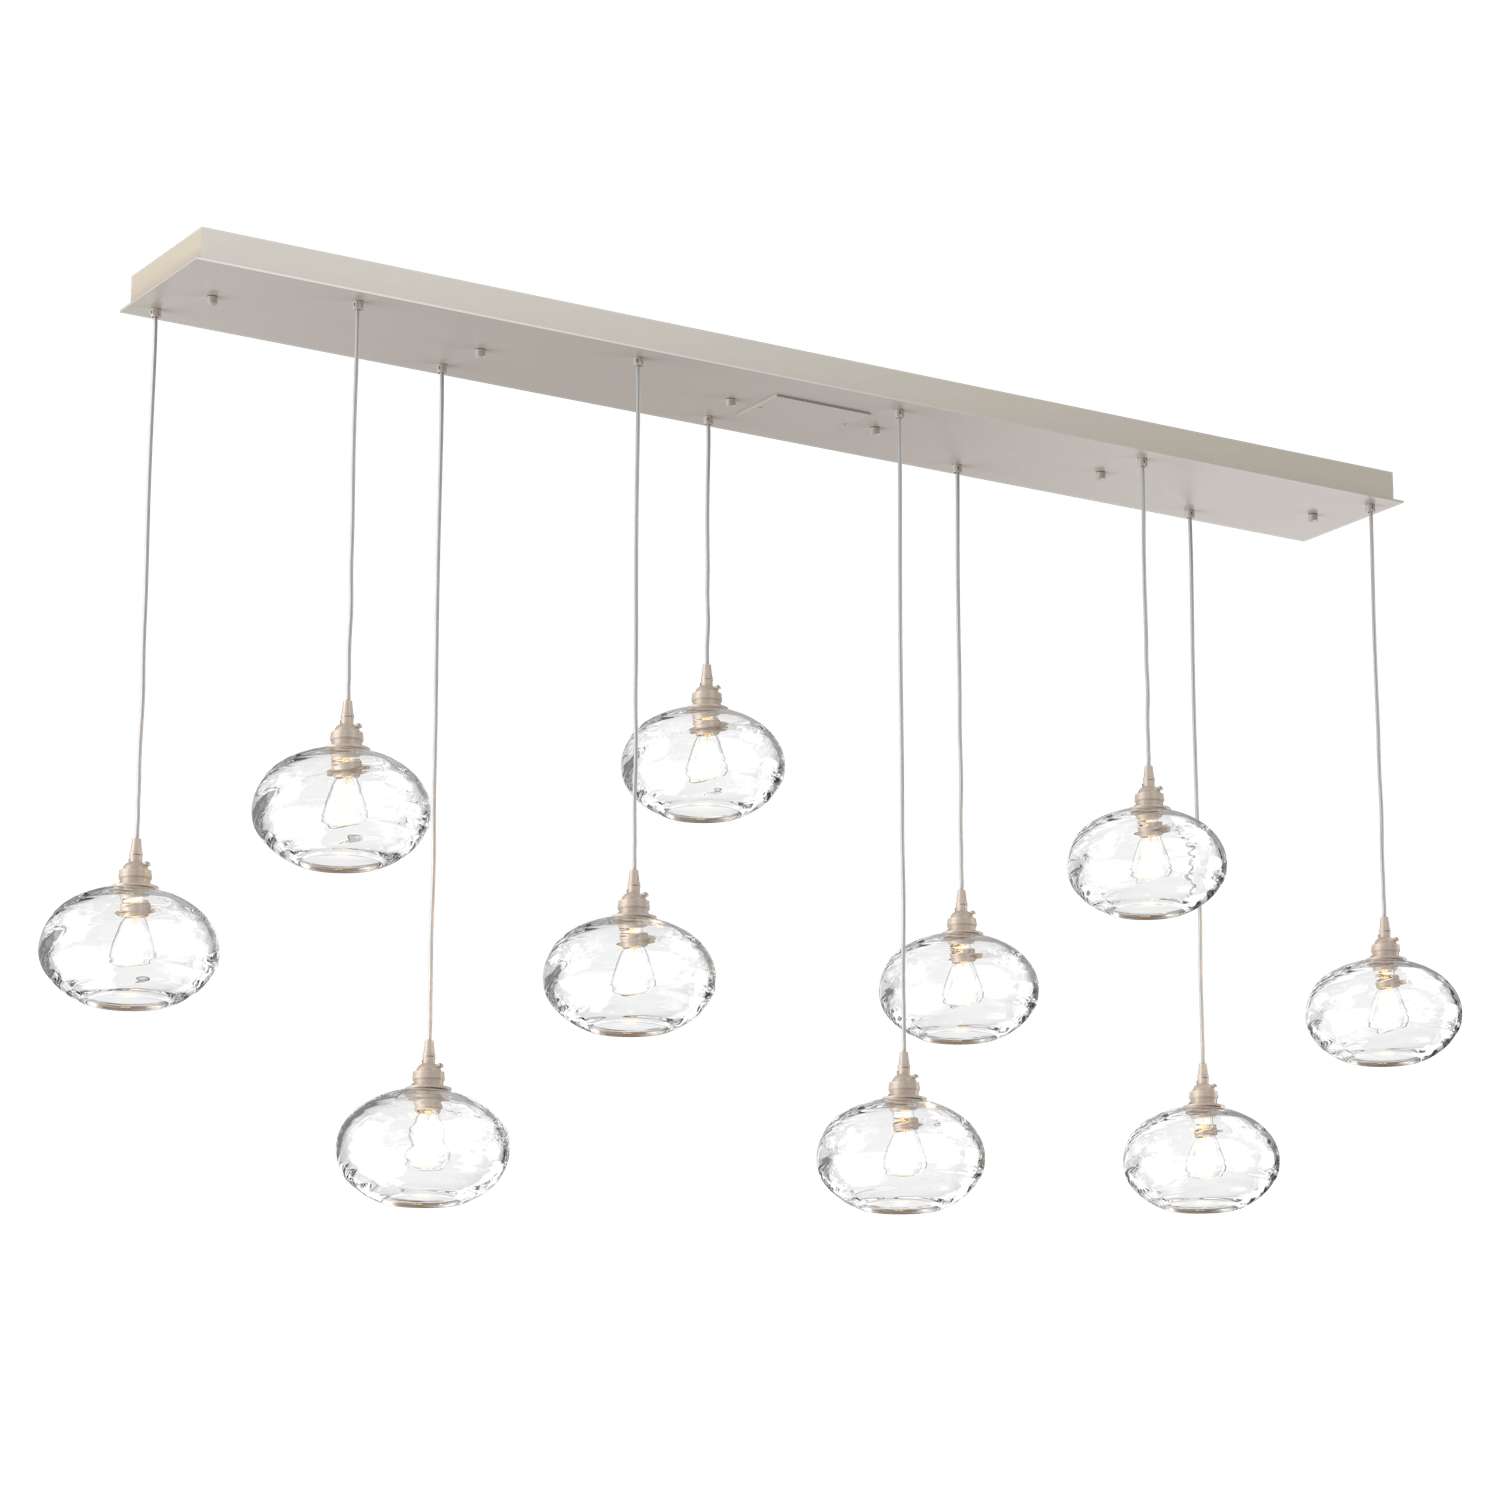 PLB0036-10-BS-OC-Hammerton-Studio-Optic-Blown-Glass-Coppa-10-light-linear-pendant-chandelier-with-metallic-beige-silver-finish-and-optic-clear-blown-glass-shades-and-incandescent-lamping